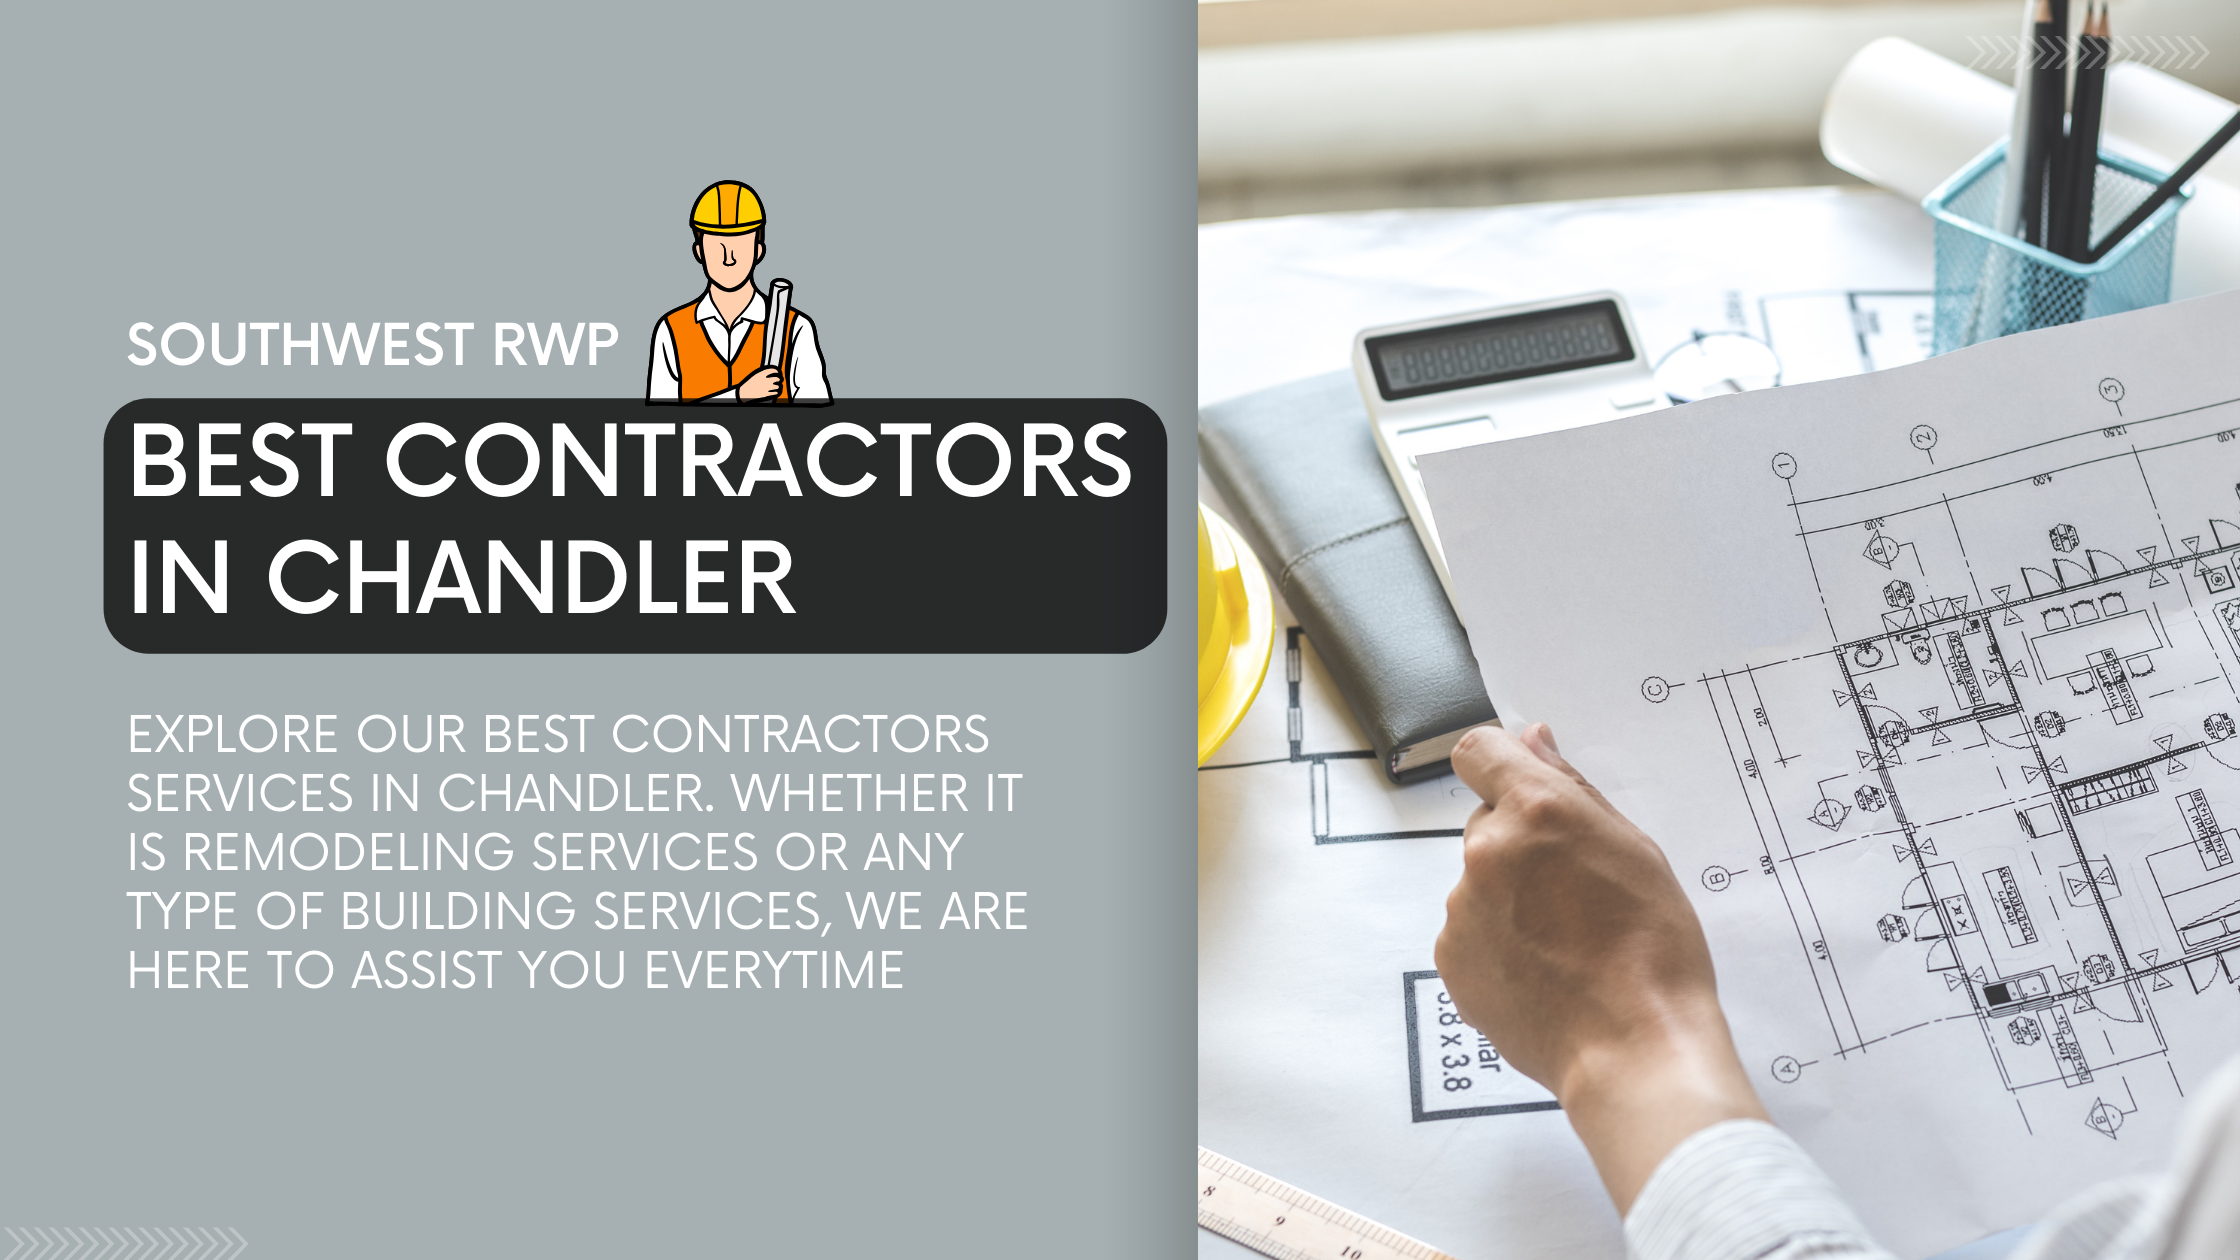 Finding the Contractor services Online in Chandler